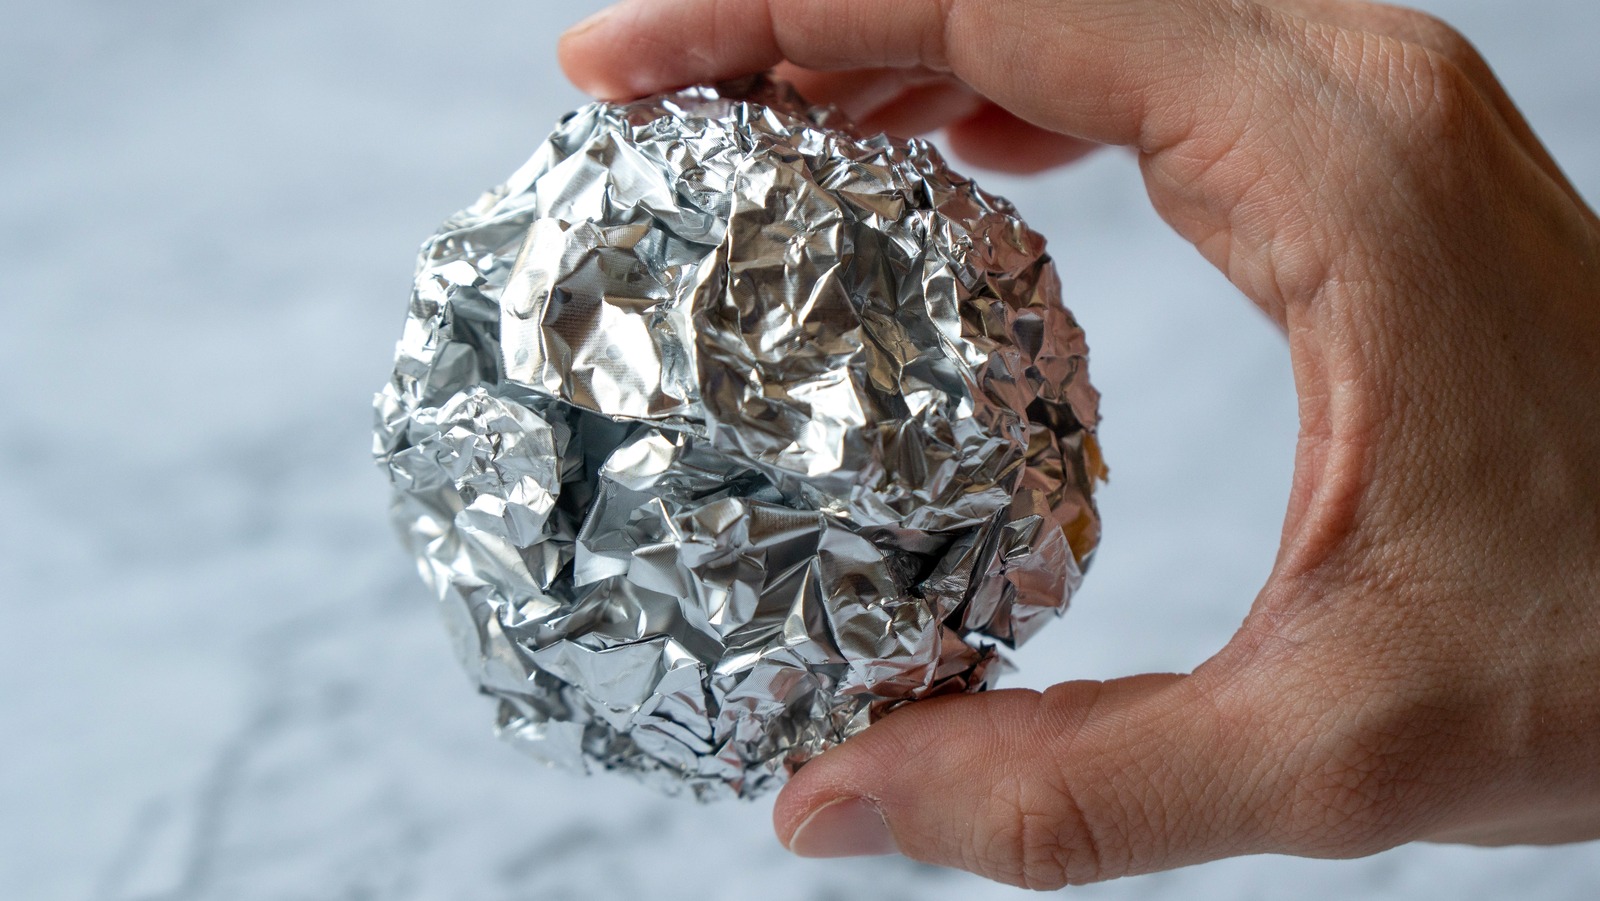 https://www.foodrepublic.com/img/gallery/you-should-be-cleaning-your-kitchen-with-aluminum-foil/l-intro-1691164364.jpg